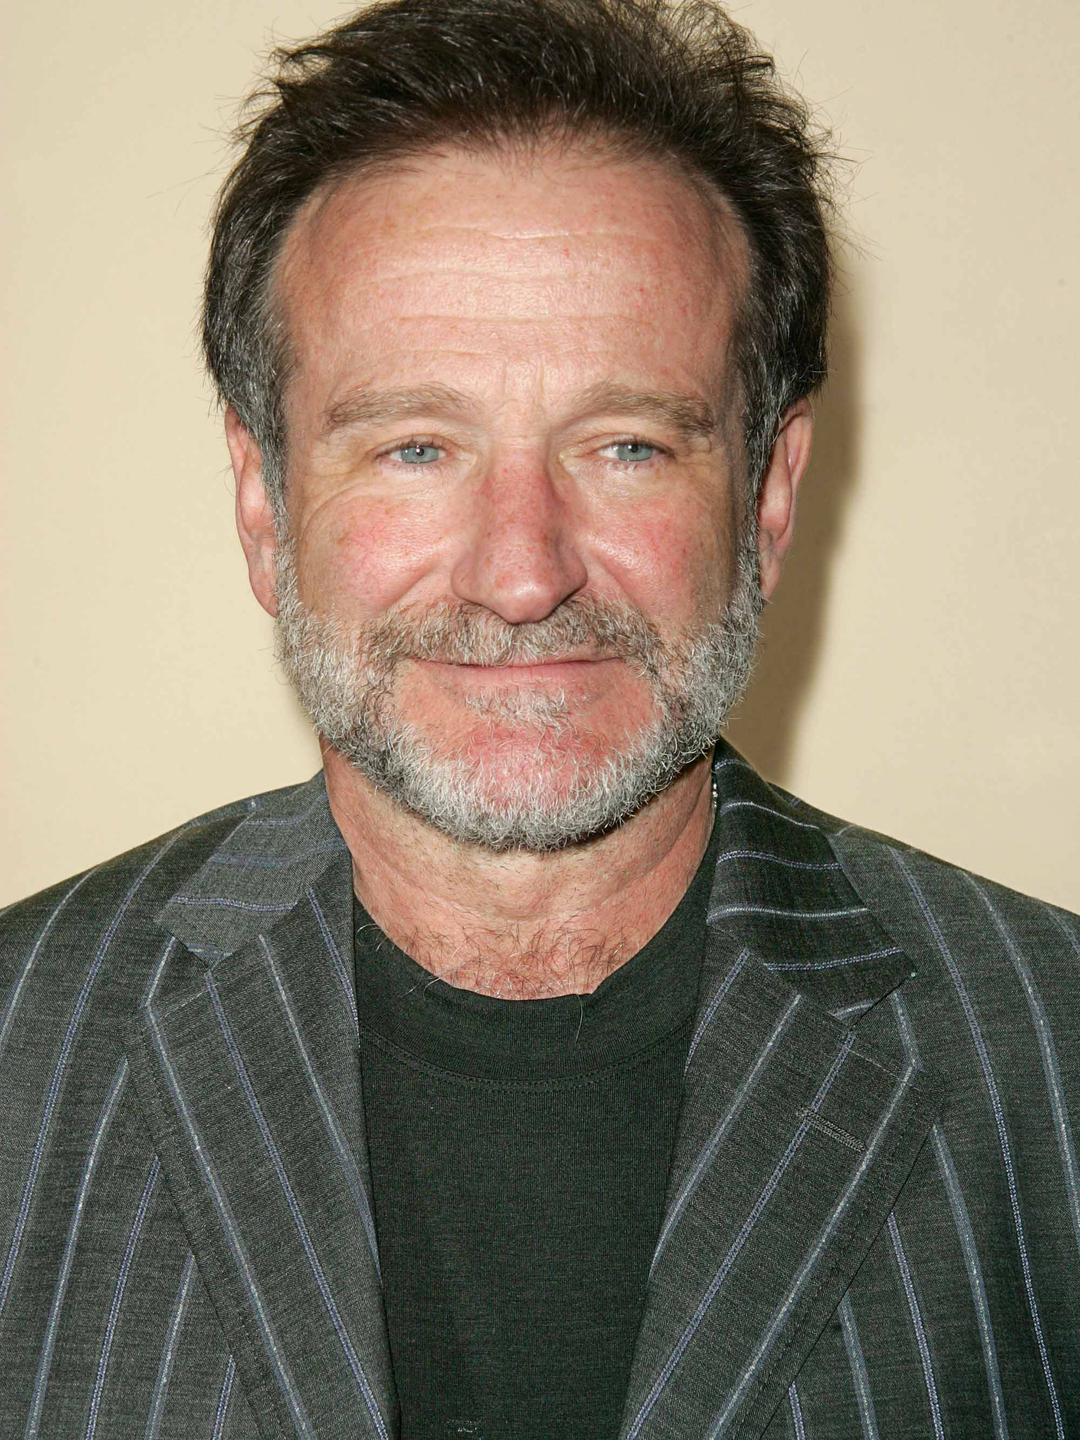 Robin Williams who is his mother